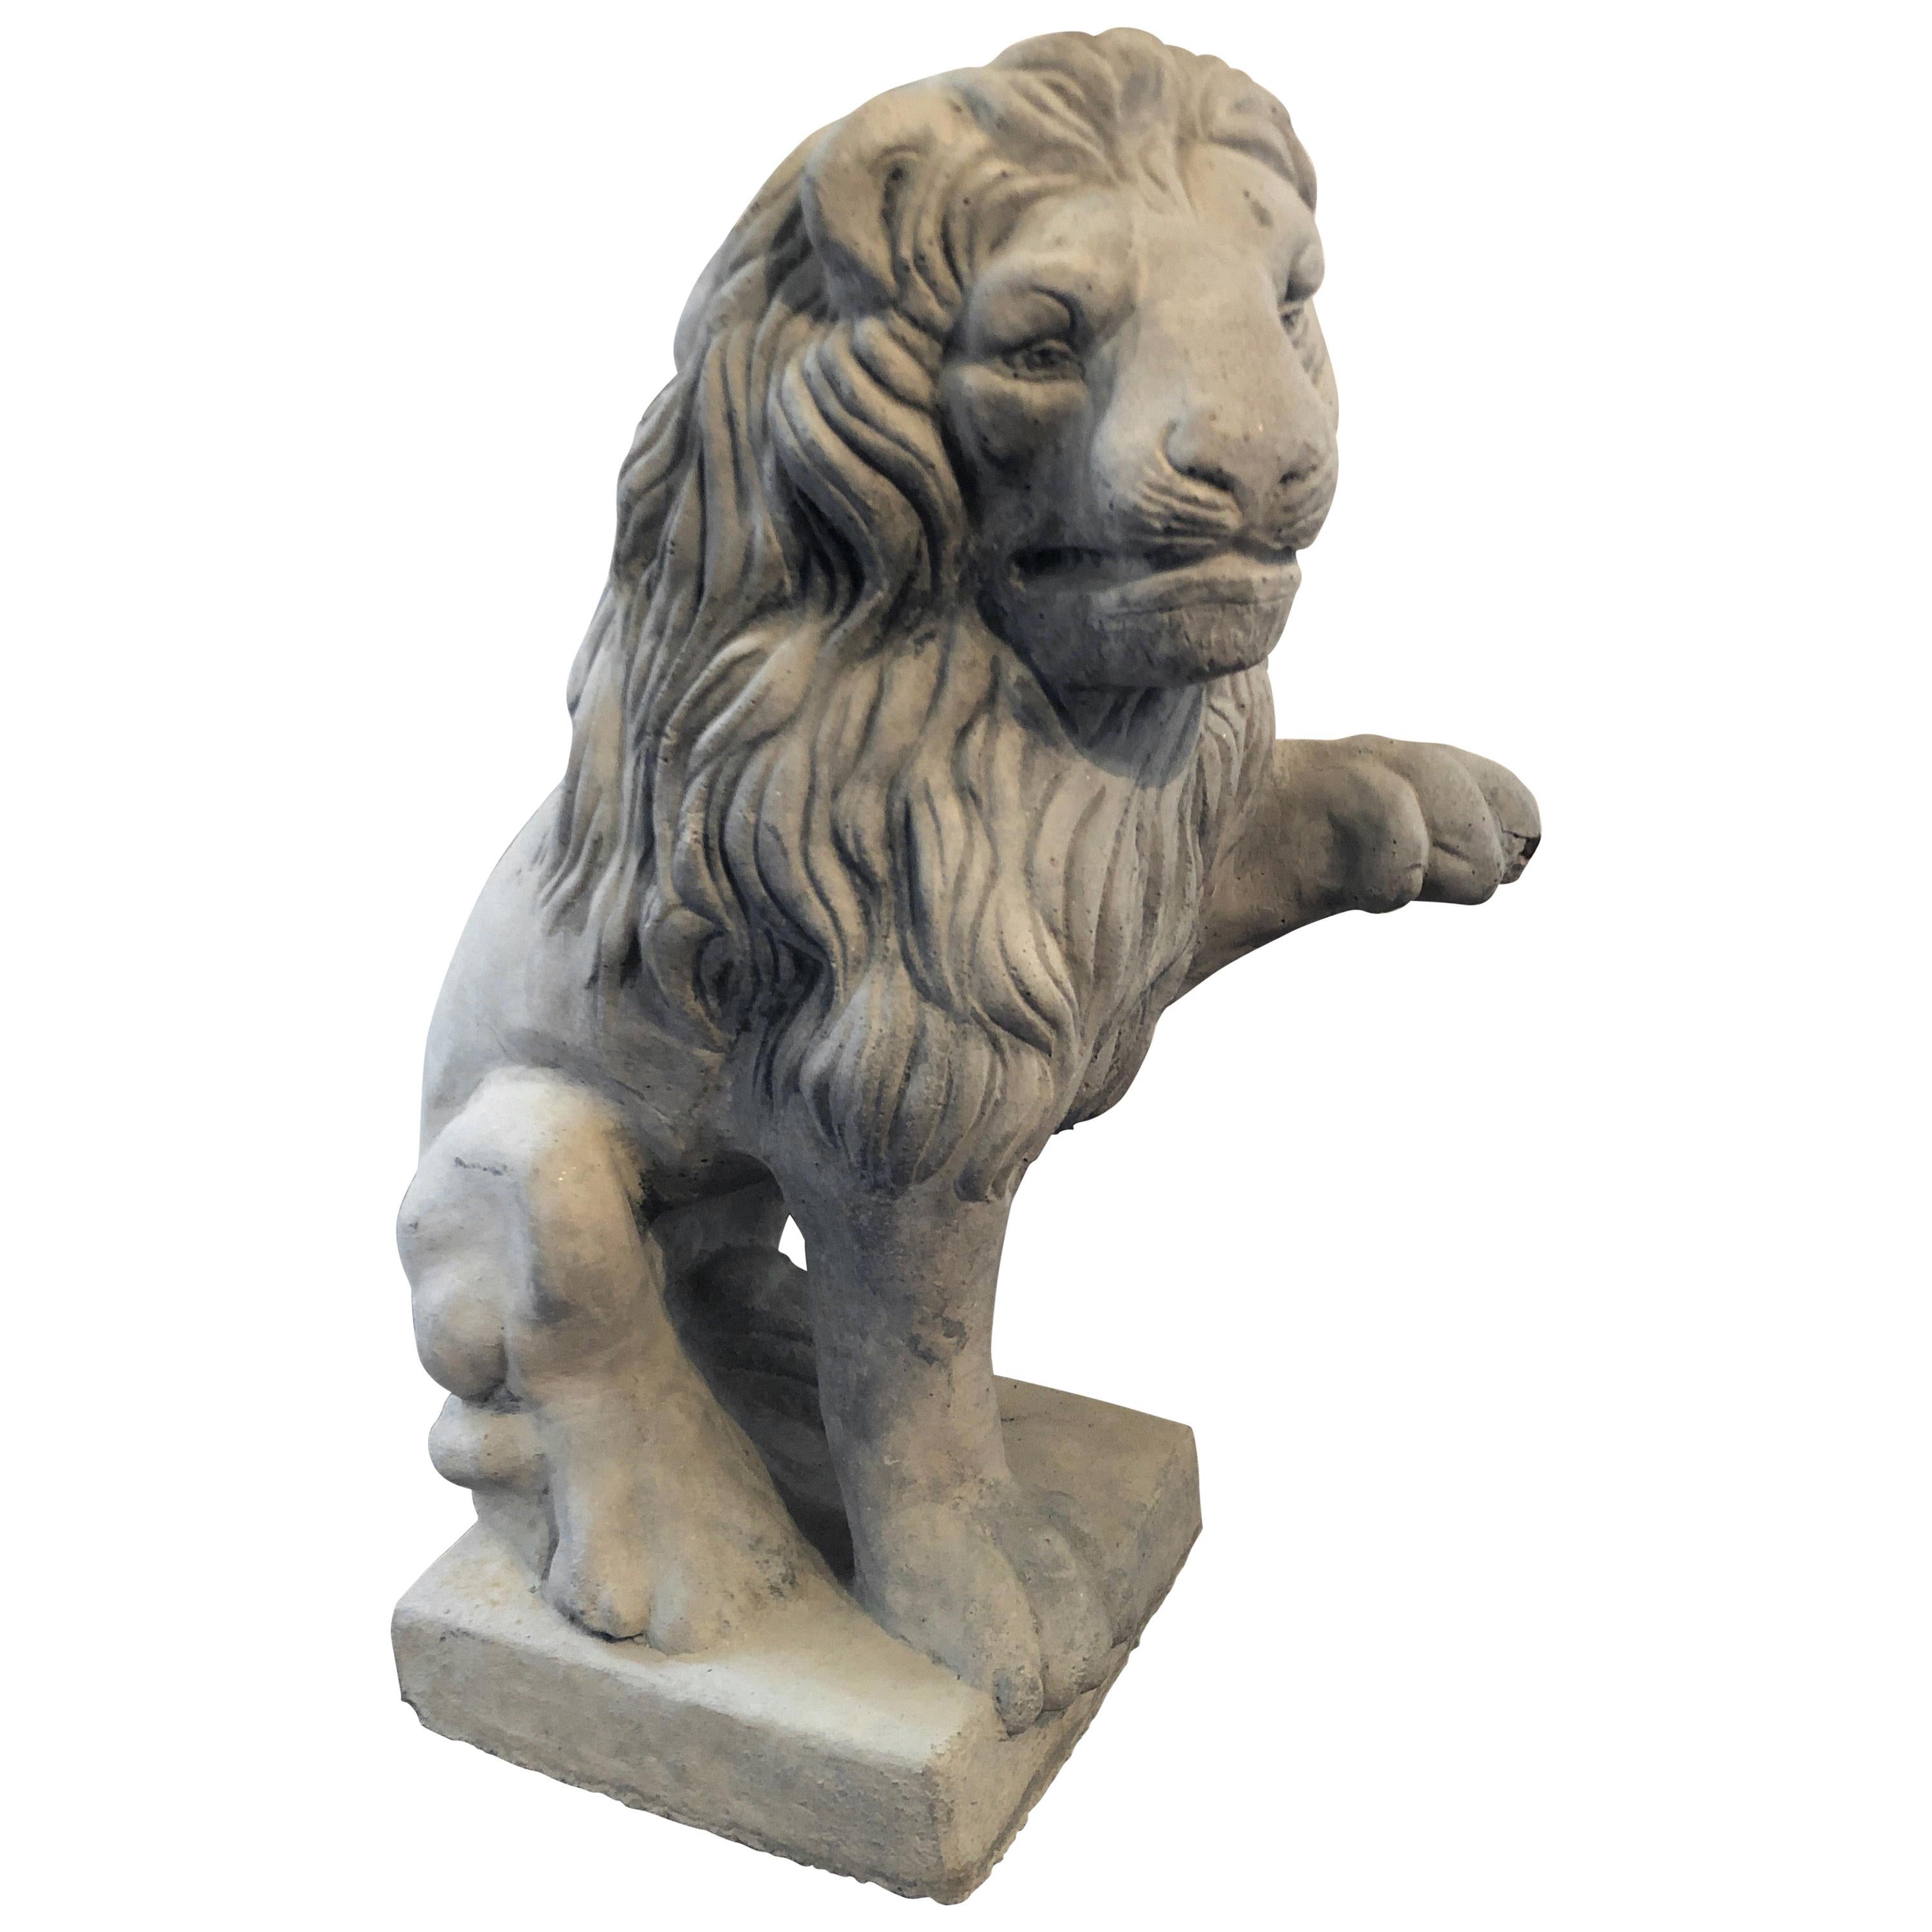 3D Printed Lion-haired Poodle Dog Statue